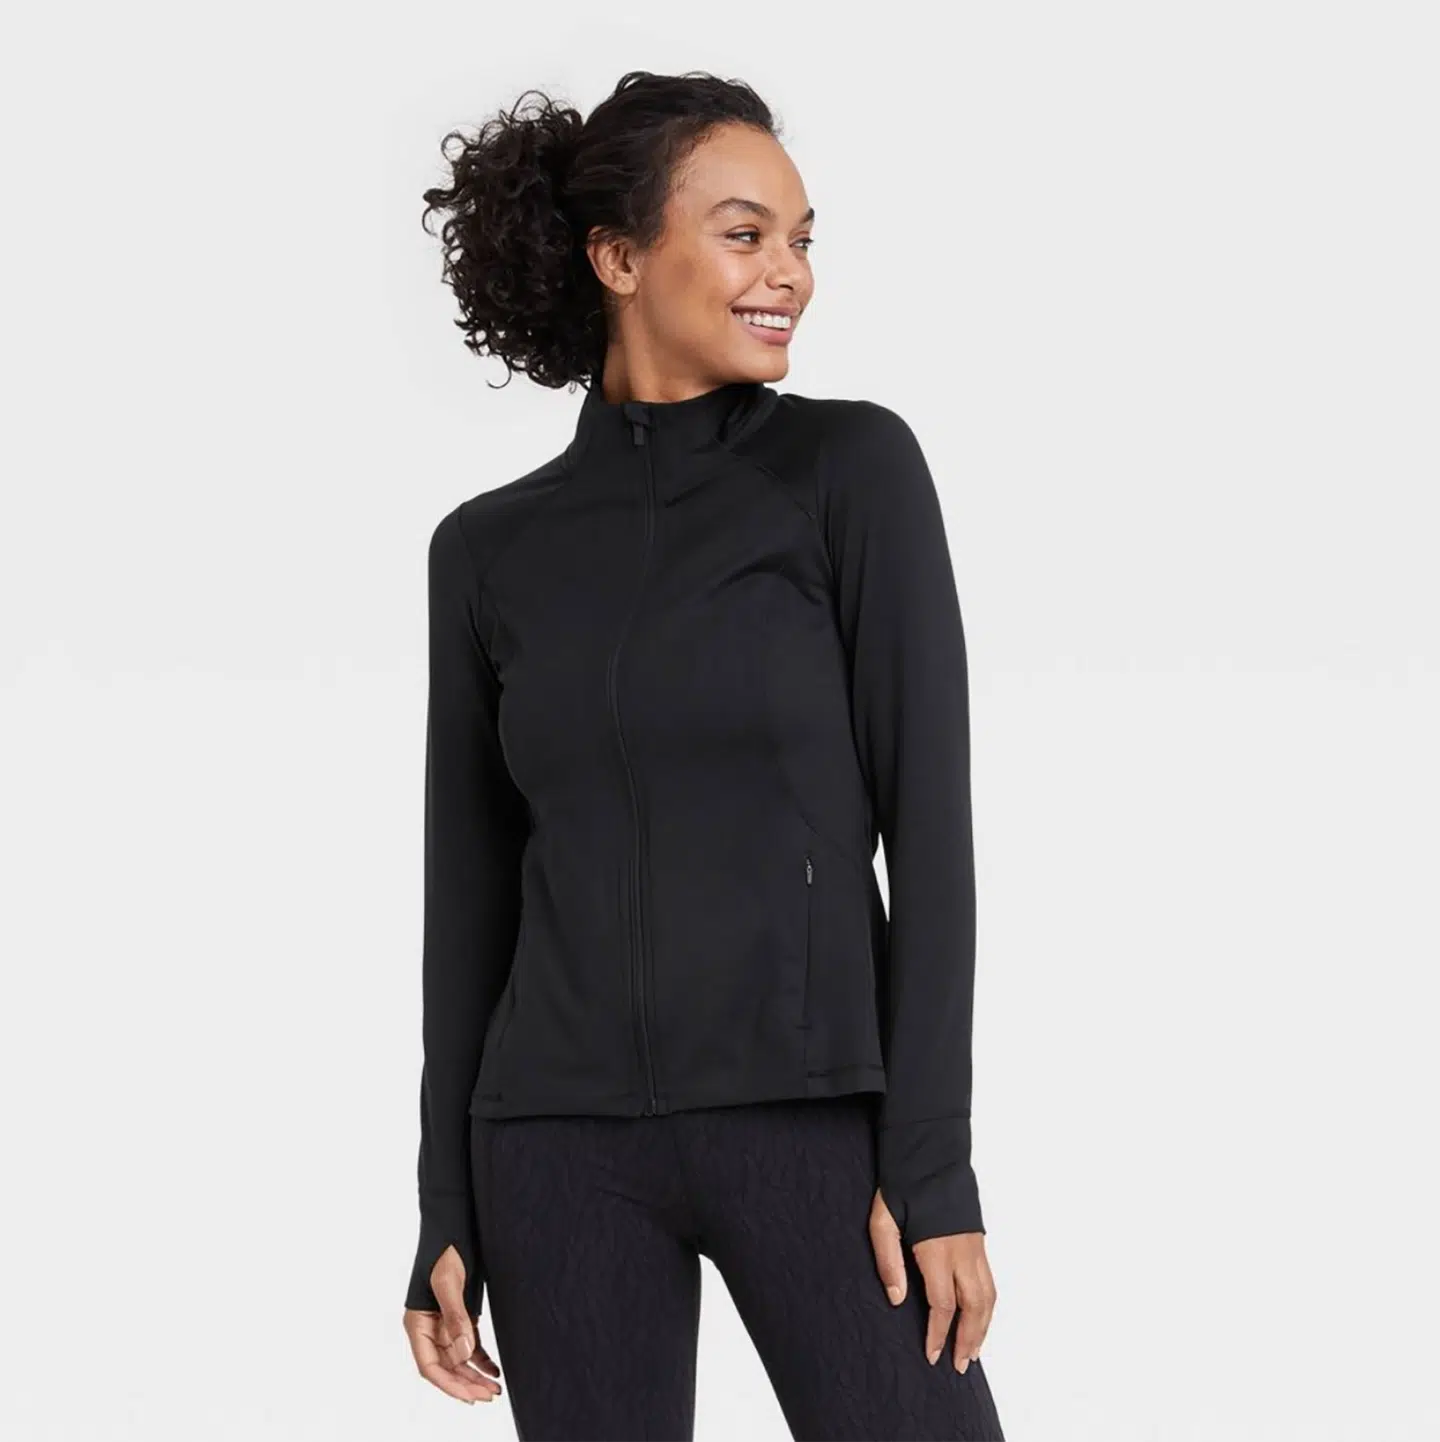 I tried on Shein's Lululemon dupes and they are the EXACT same